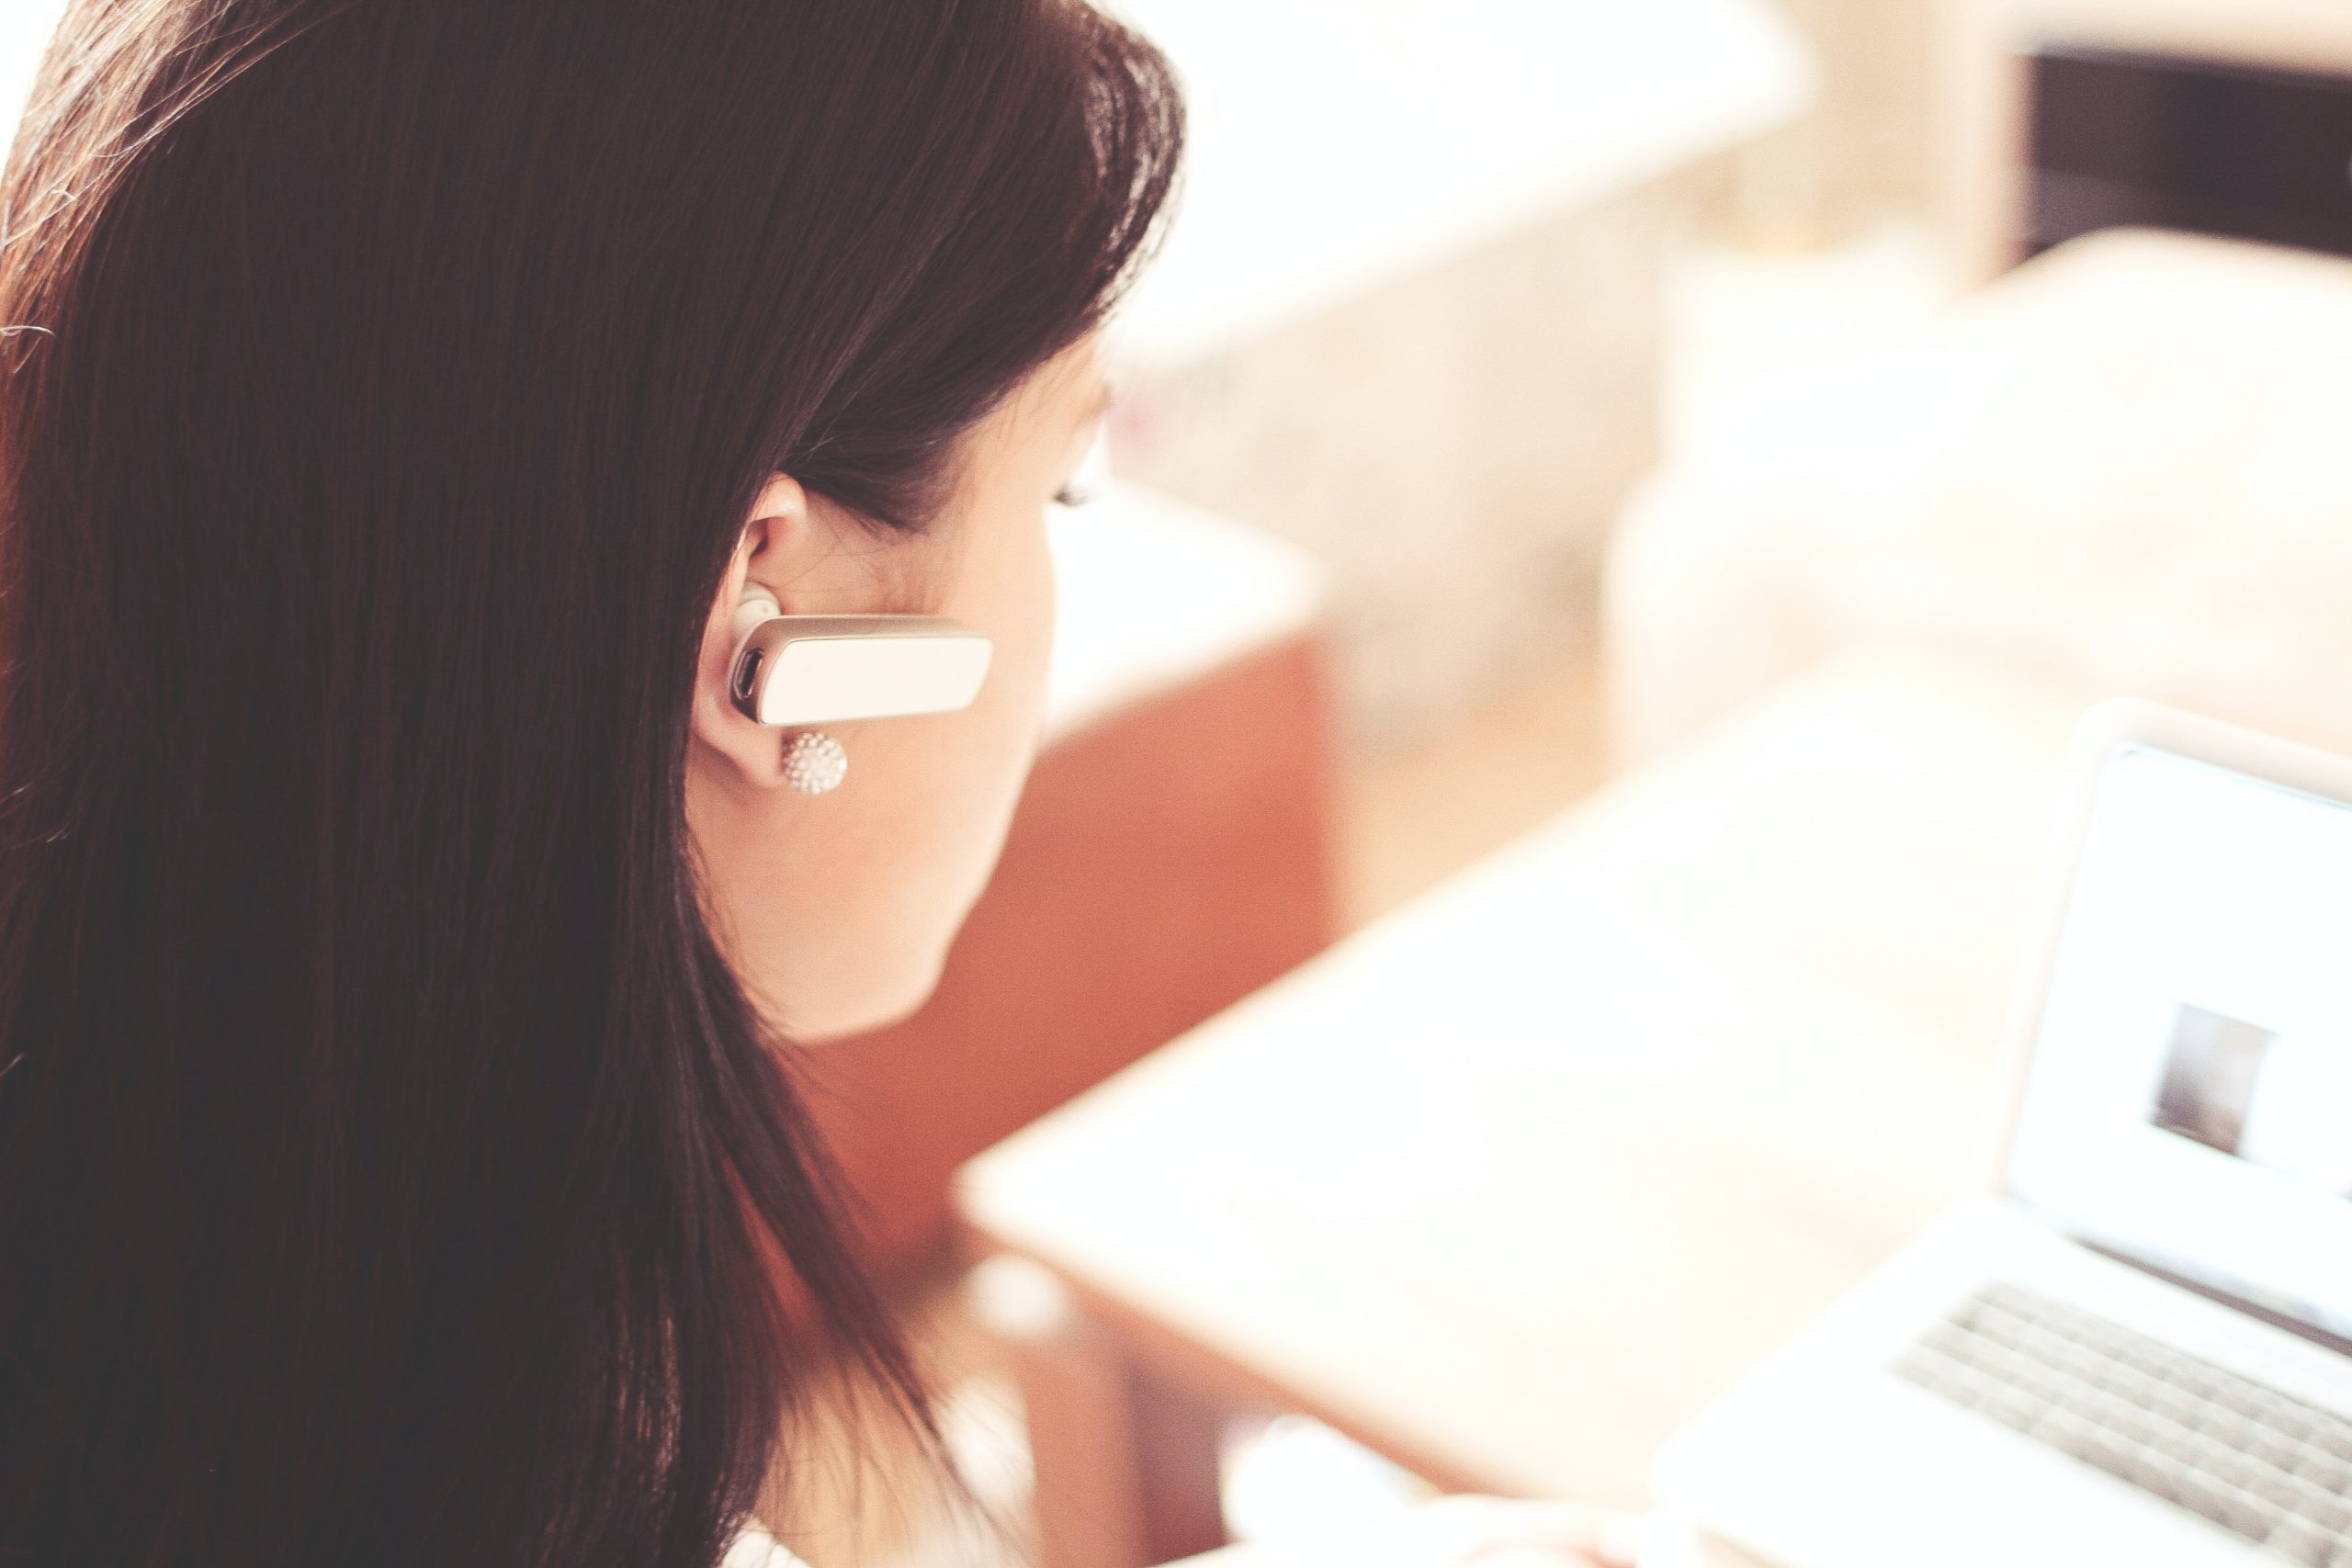 Outsourced Telemarketing: When to Consider It & What to Do